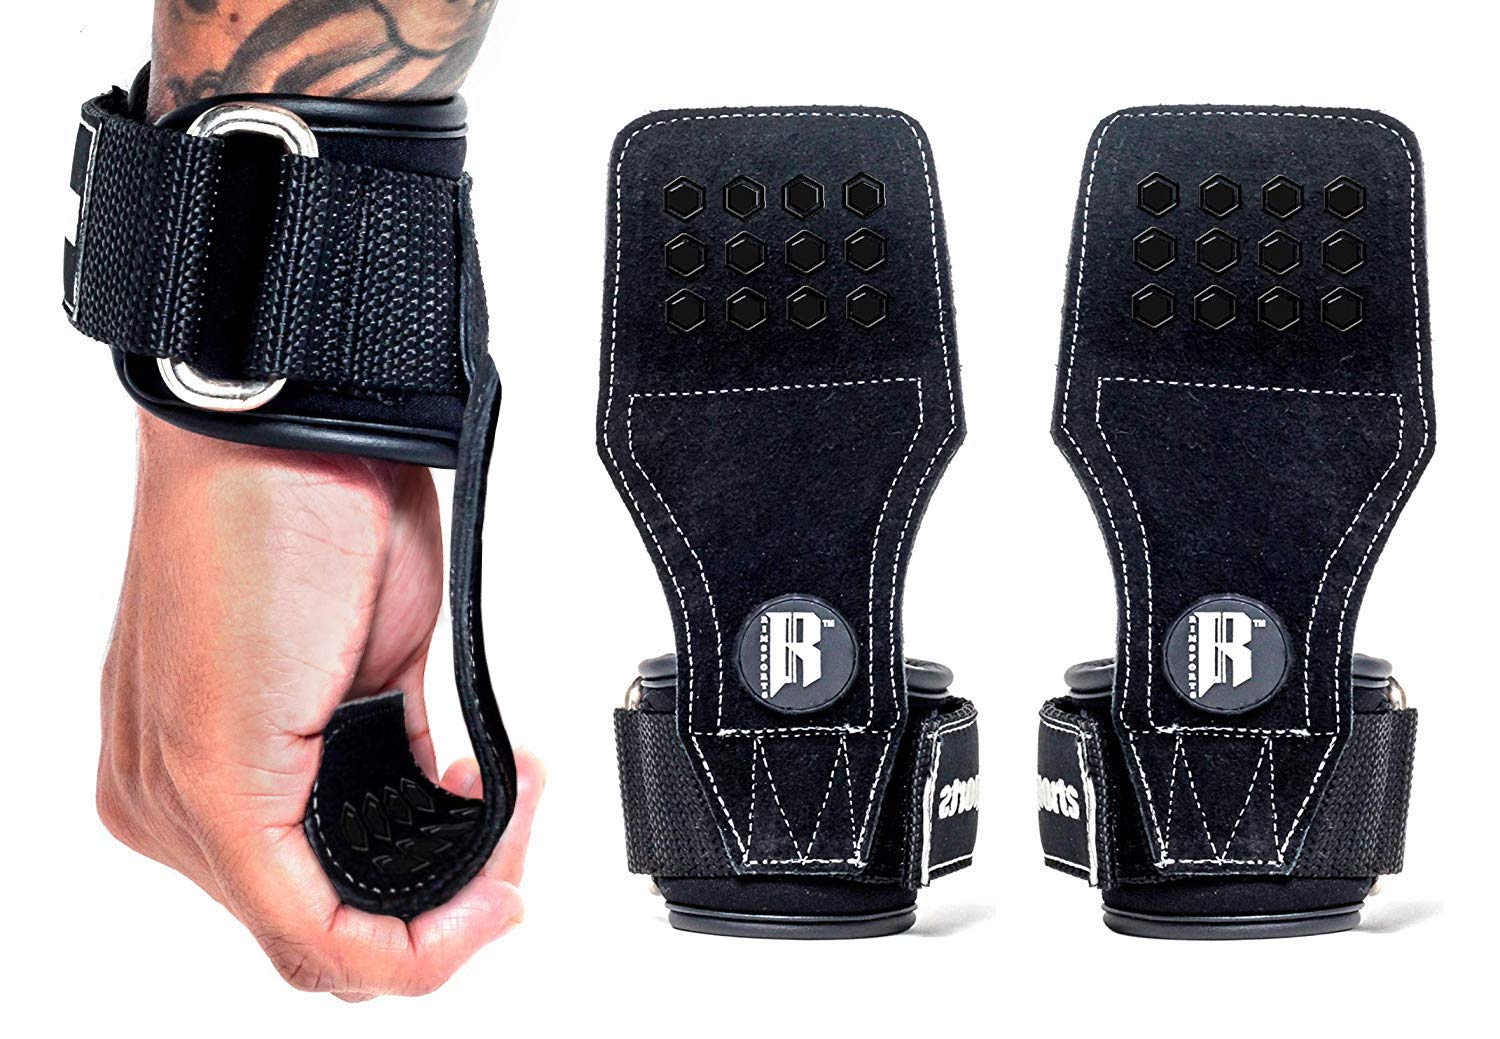 Amazon.com: ベルセルク Berserk Wrist Wraps - 1 Pair Of Anime Wrist Wraps,  Perfect for Strength Athletes, Powerlifters and Crossfit who love Berserk  Anime : Sports & Outdoors